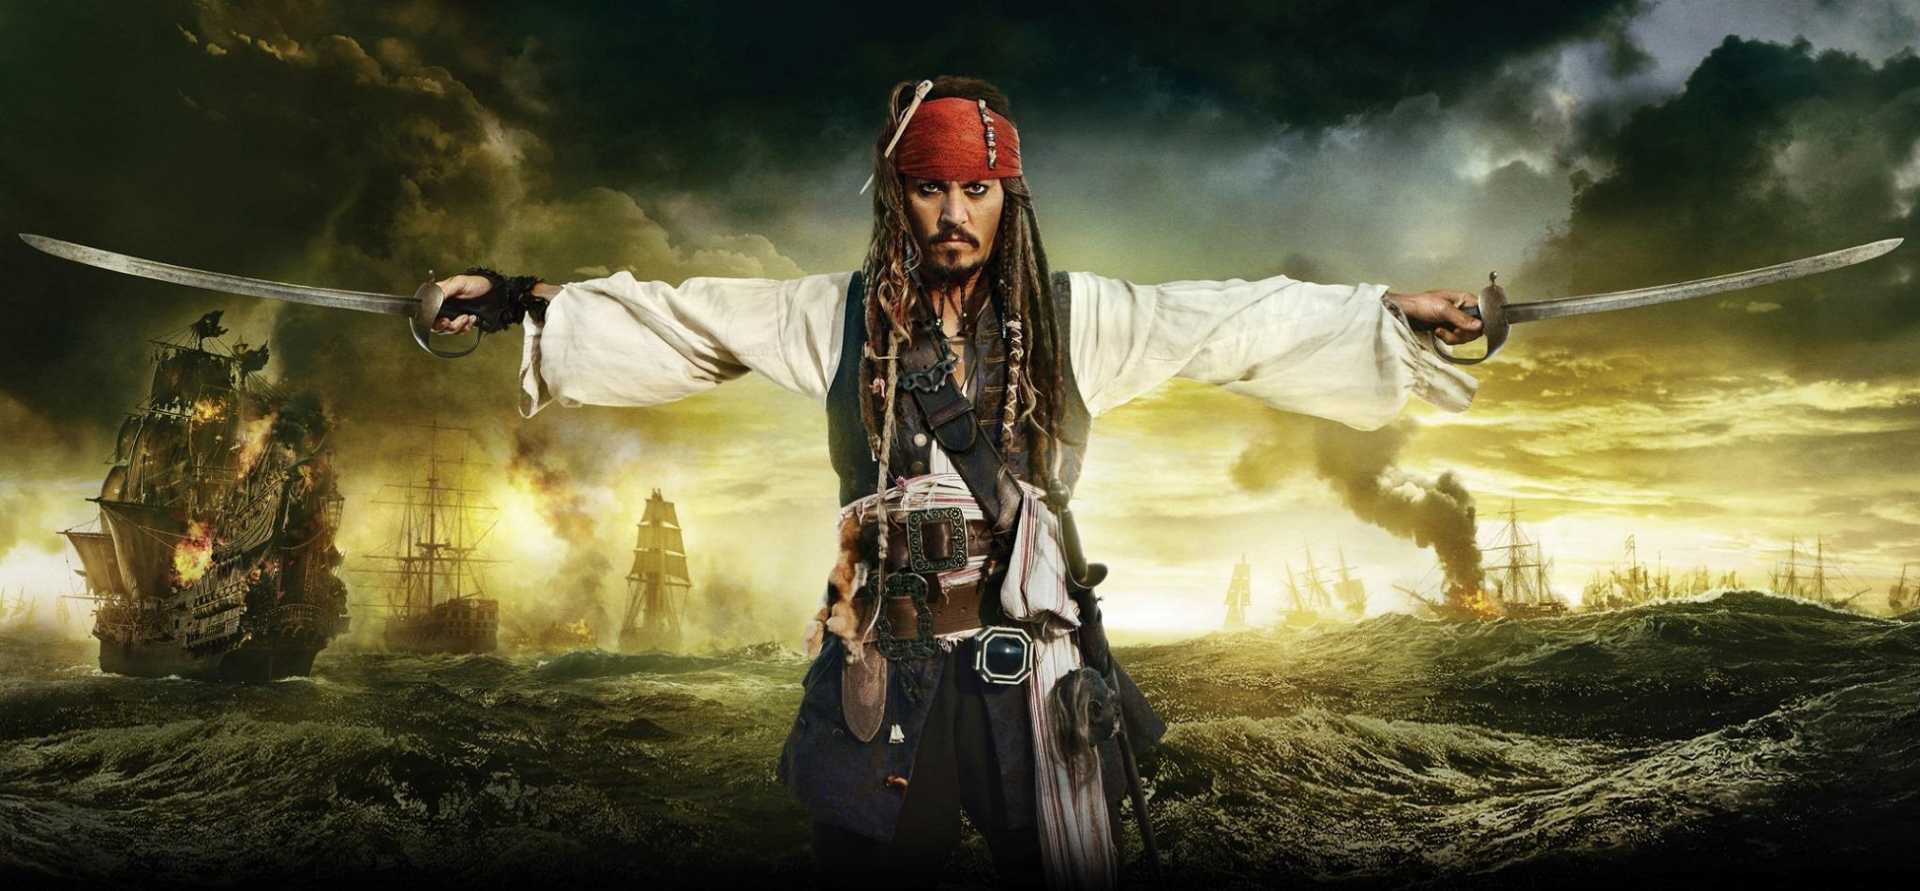 Pirates Of The Caribbean 6 Release date, Cast, Plot And Is Jack